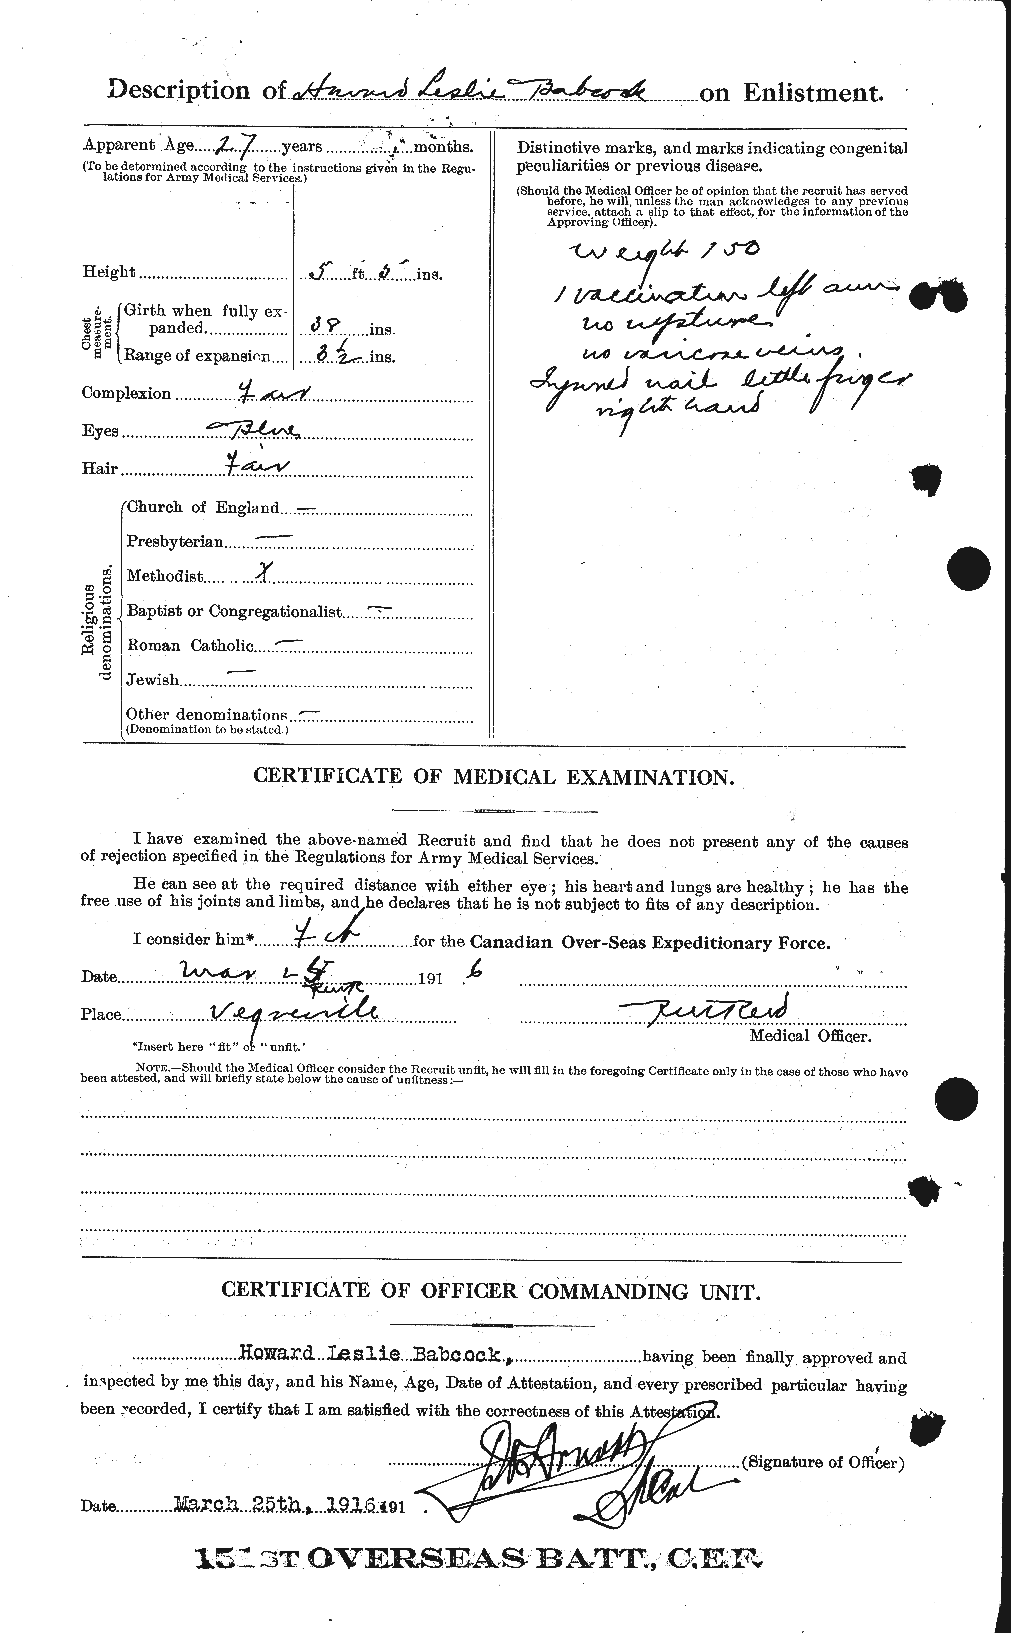 Personnel Records of the First World War - CEF 218234b